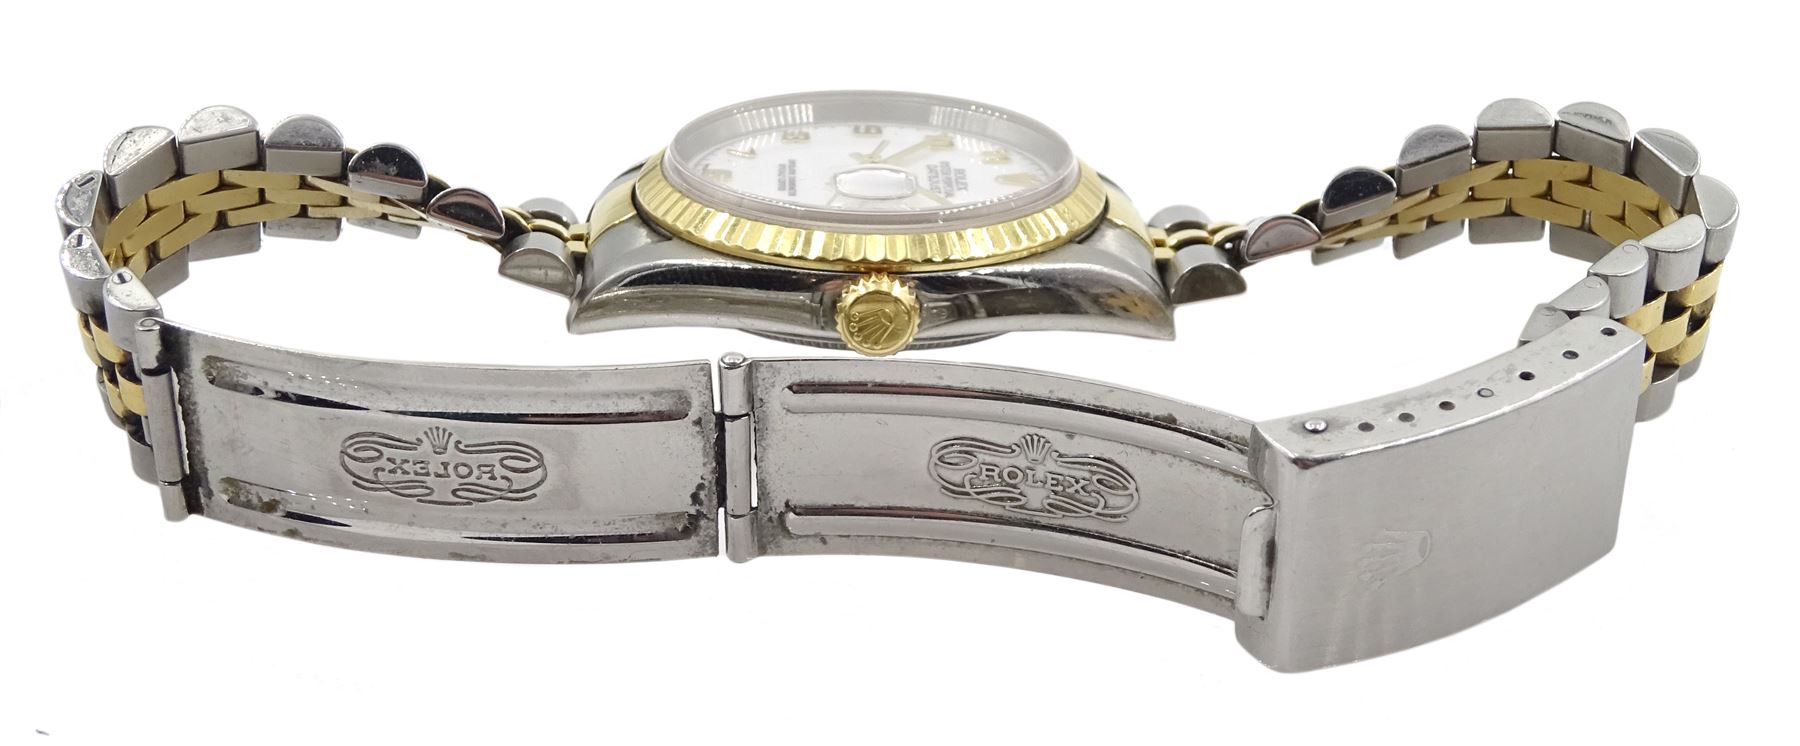 Rolex Oyster Perpetual gentleman's stainless steel and 18ct gold bracelet wristwatch - Image 3 of 6